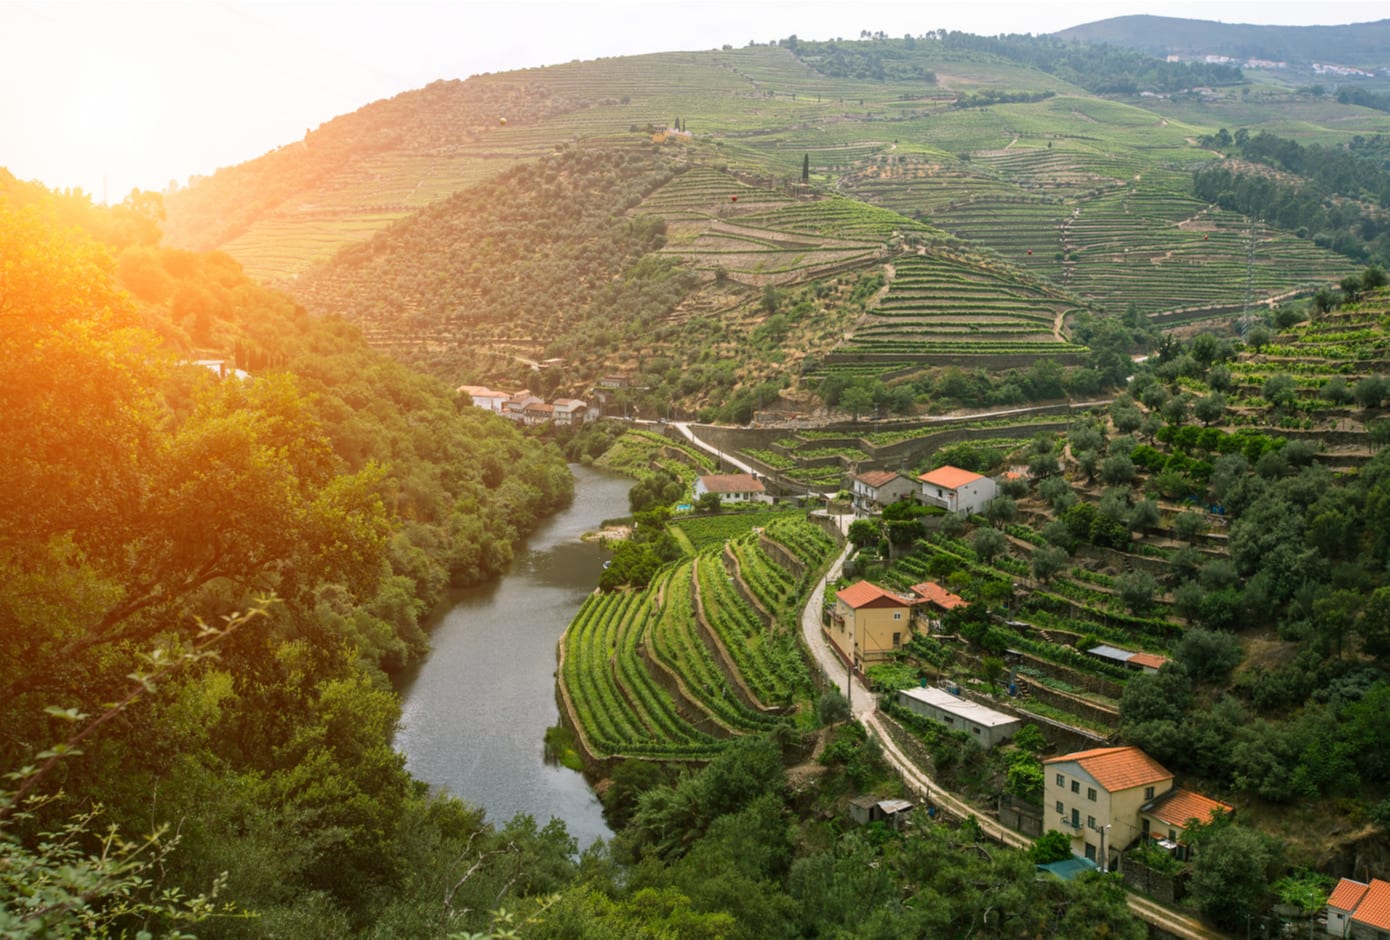 Aerial view of the Douro wine region, in Portugal